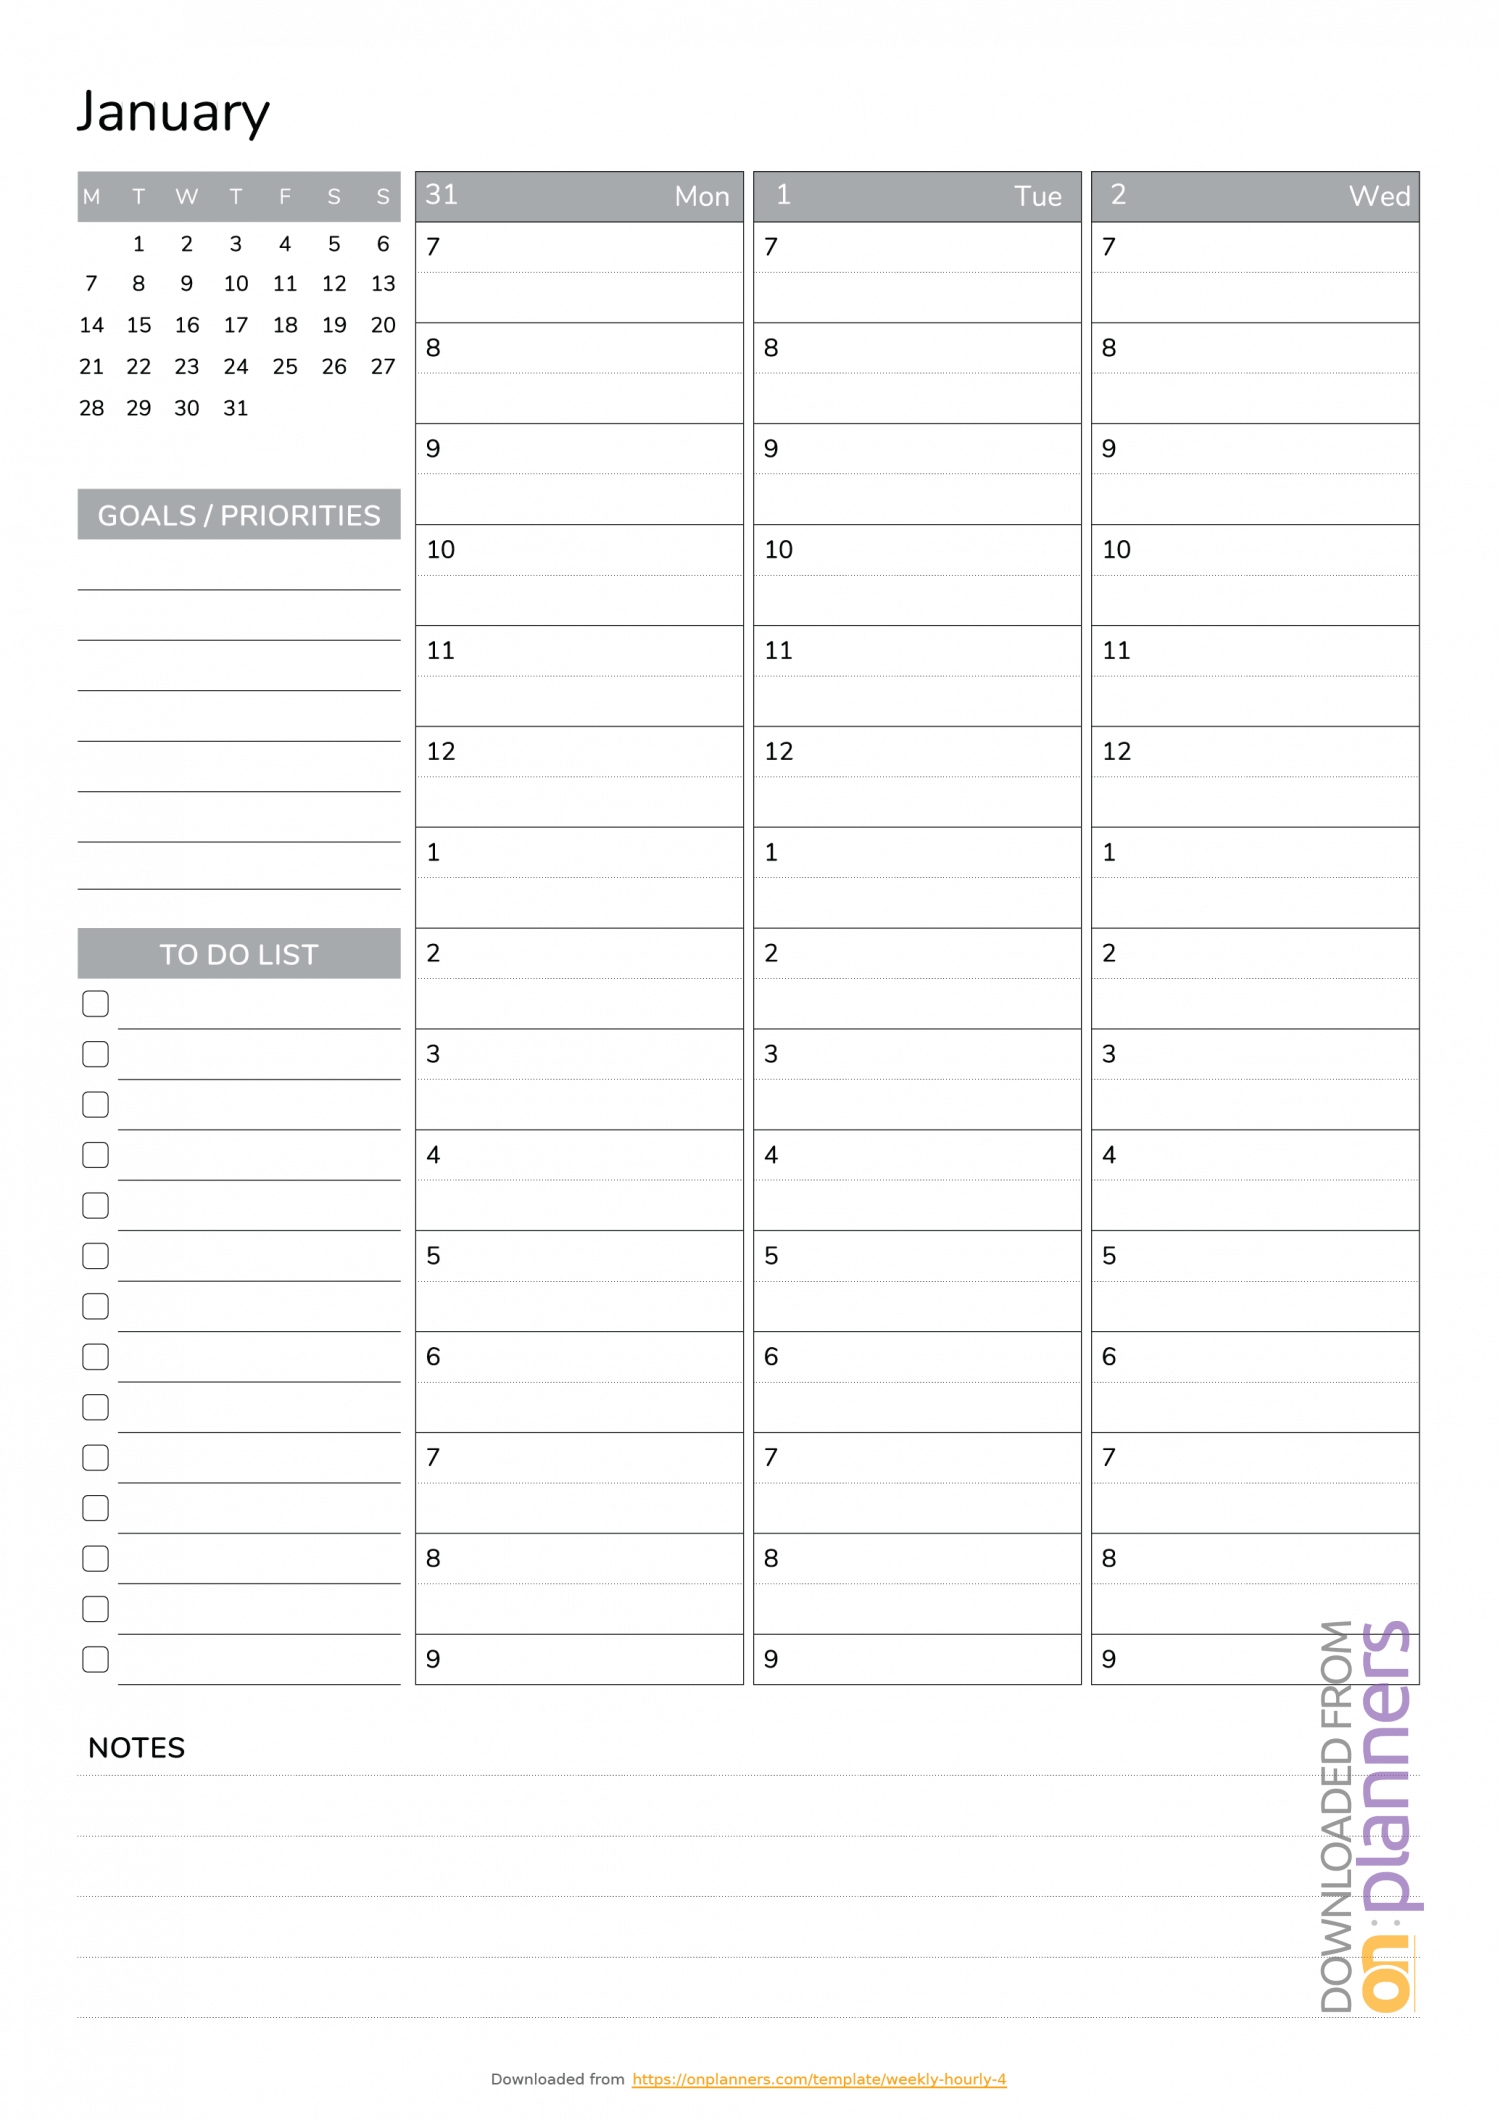 The Best Weekly Schedule Templates. Organize Your Time Term 3 Calendar Template